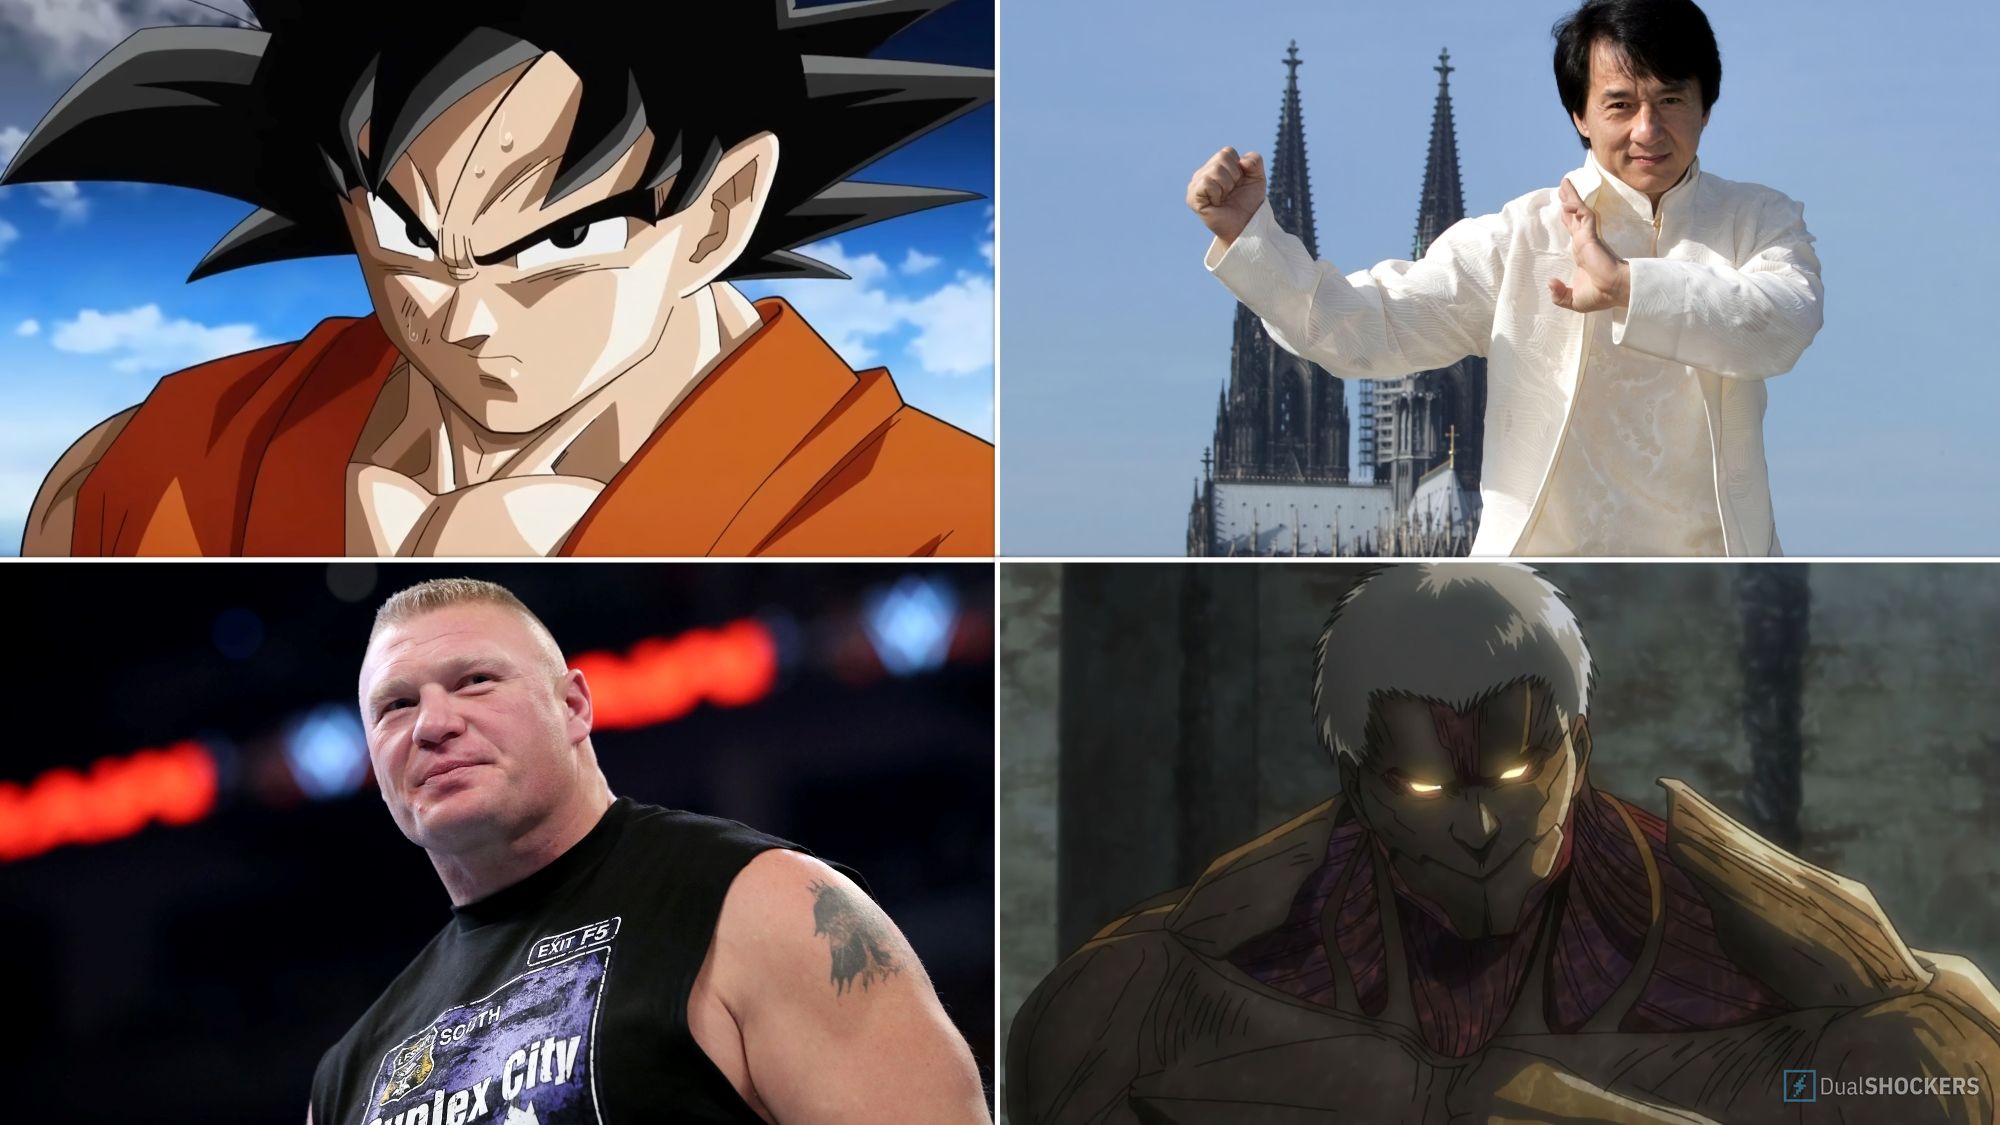 A collage depicting Goku, Jackie Chan, the Armored Titan, and Brock Lesnar